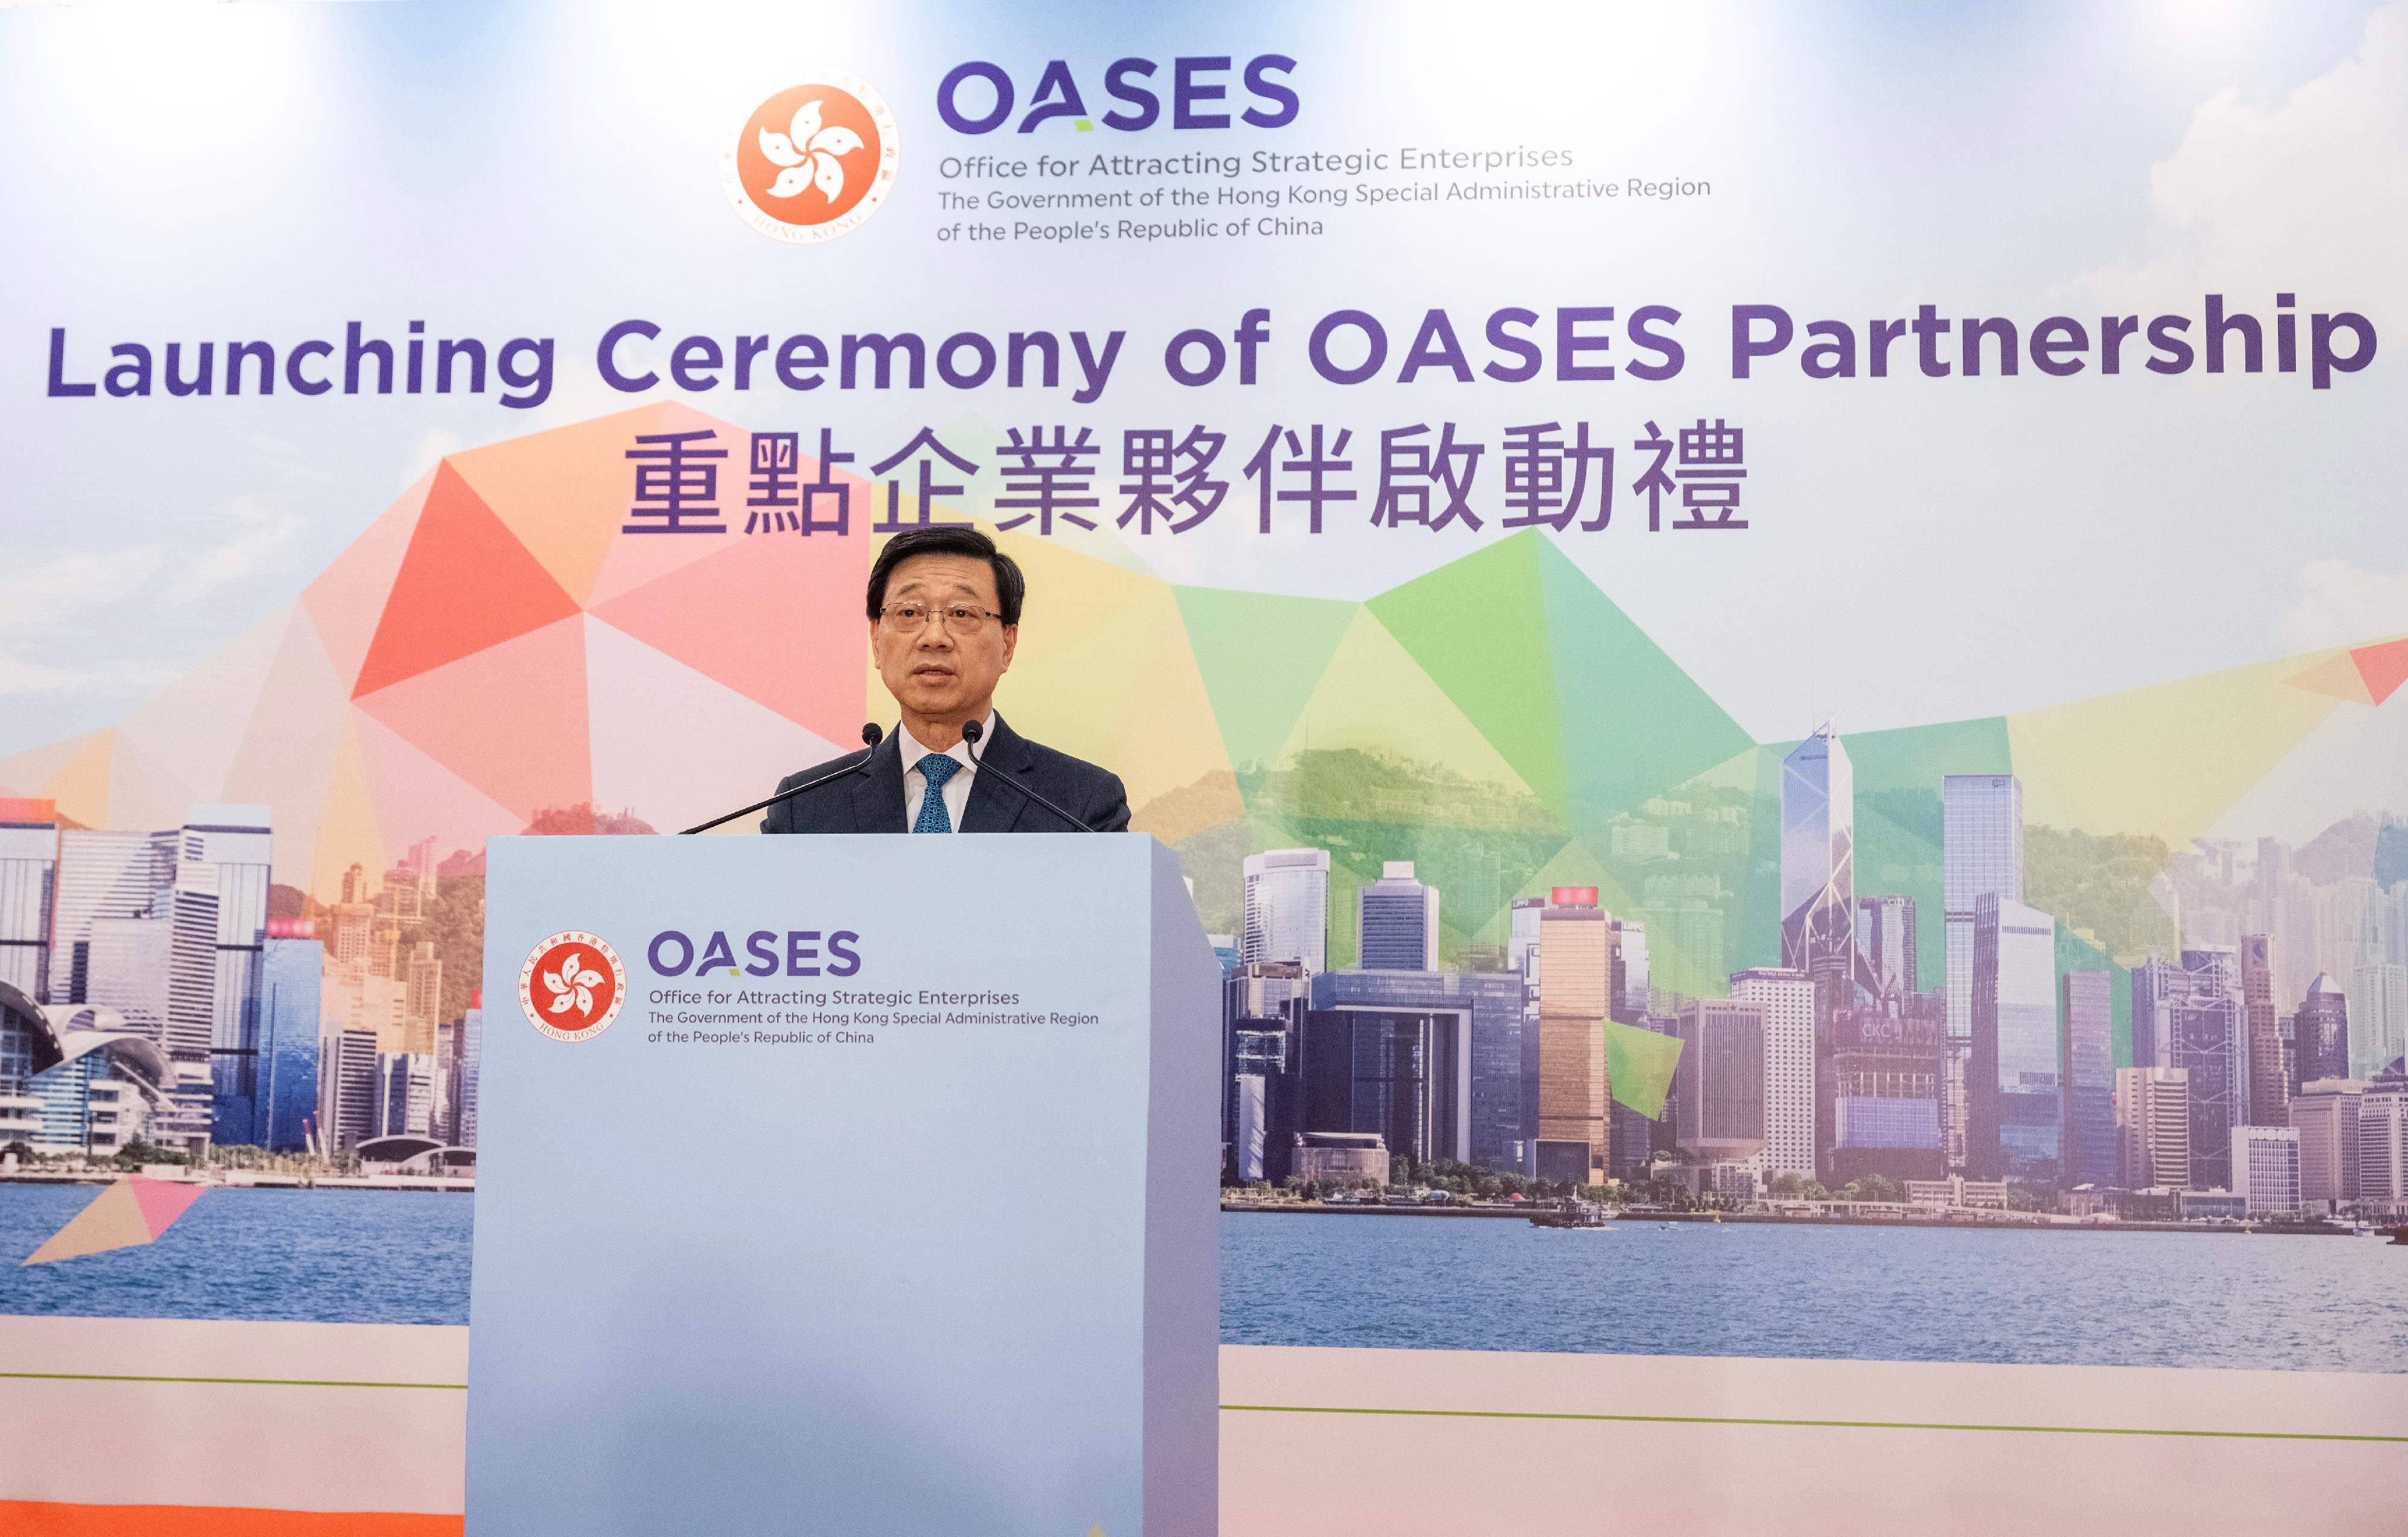 The Chief Executive, Mr John Lee, speaks at the Launching Ceremony of OASES Partnership held by the Office for Attracting Strategic Enterprises today (October 4).
